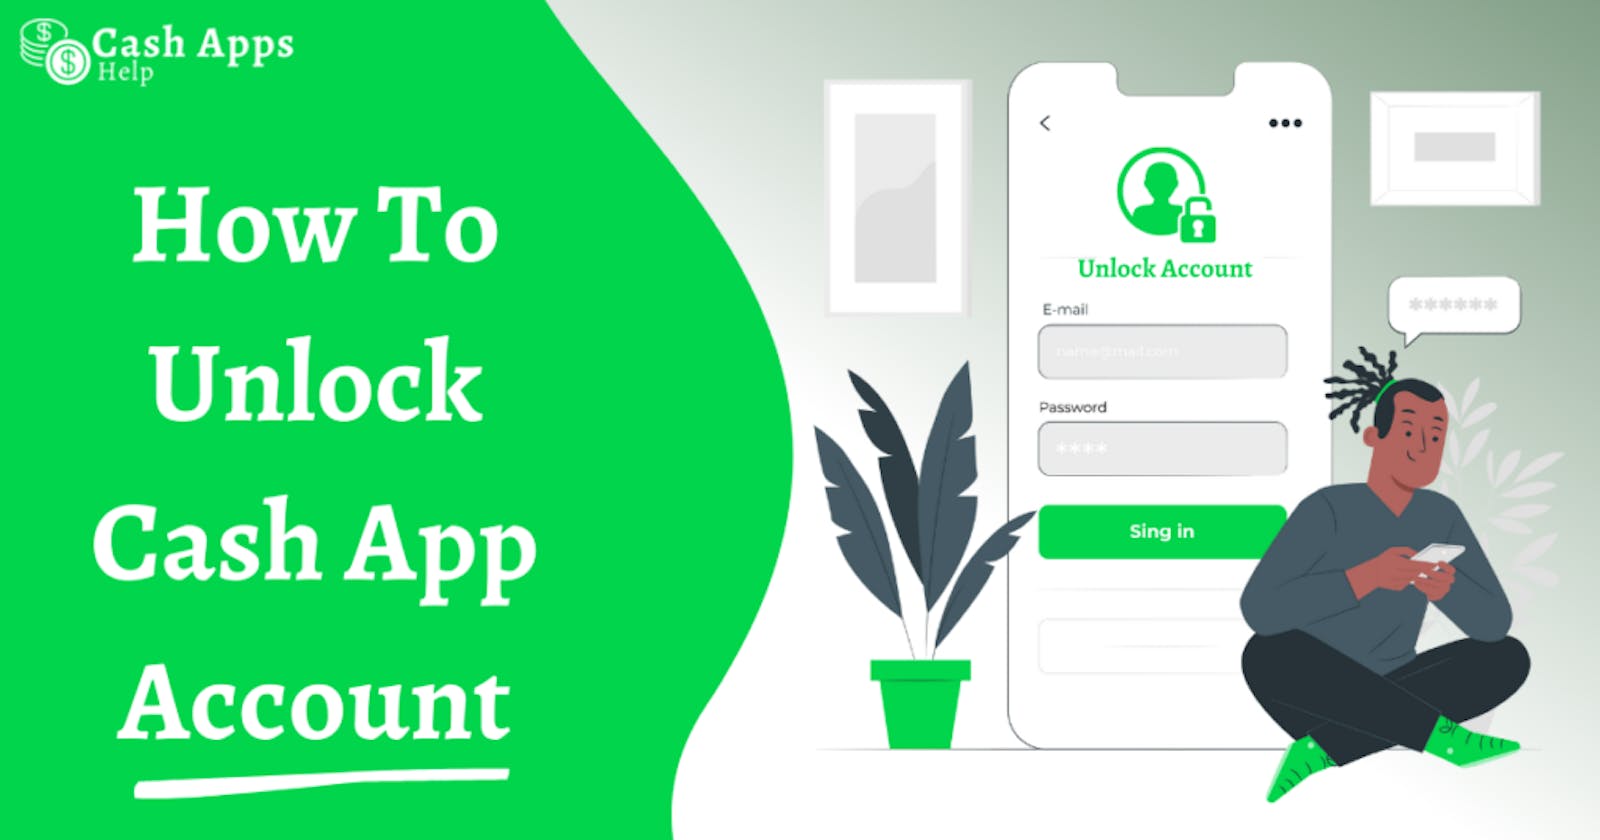 How To Unlock Cash App Account - Why Is My Account Locked On Cash App?